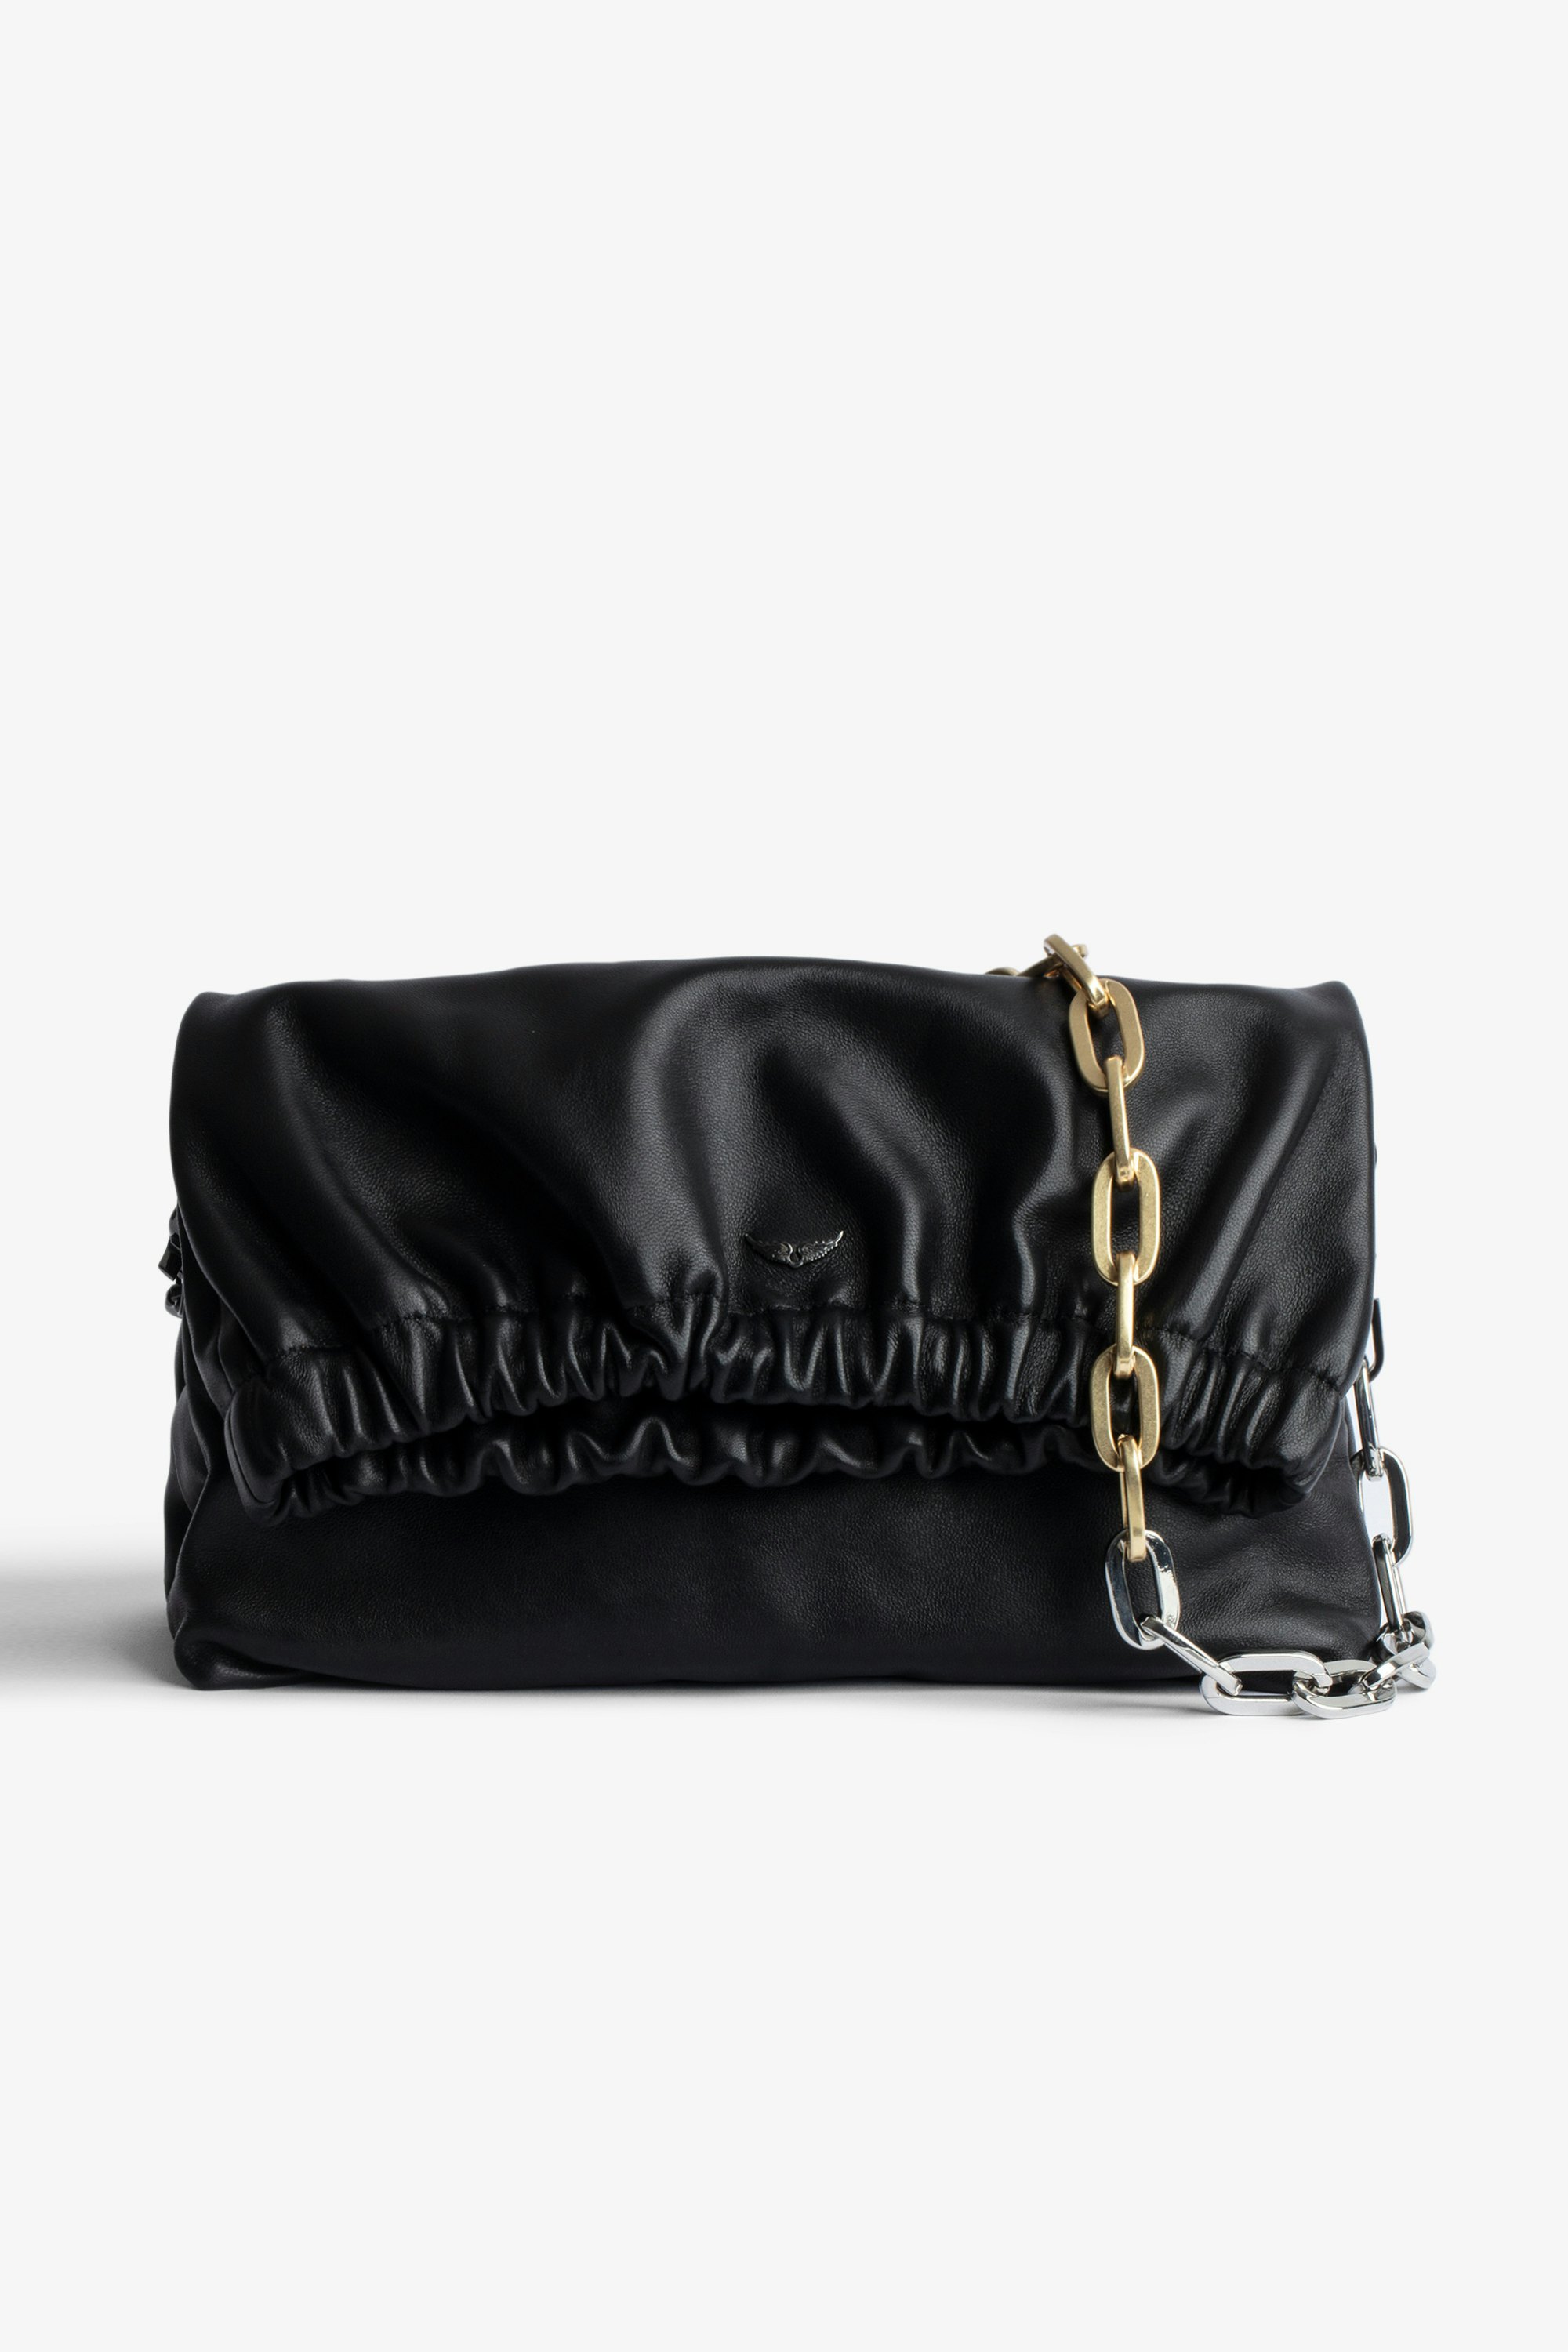 Rockyssime バッグ Women’s clutch bag in black smooth leather with two-tone metal chain